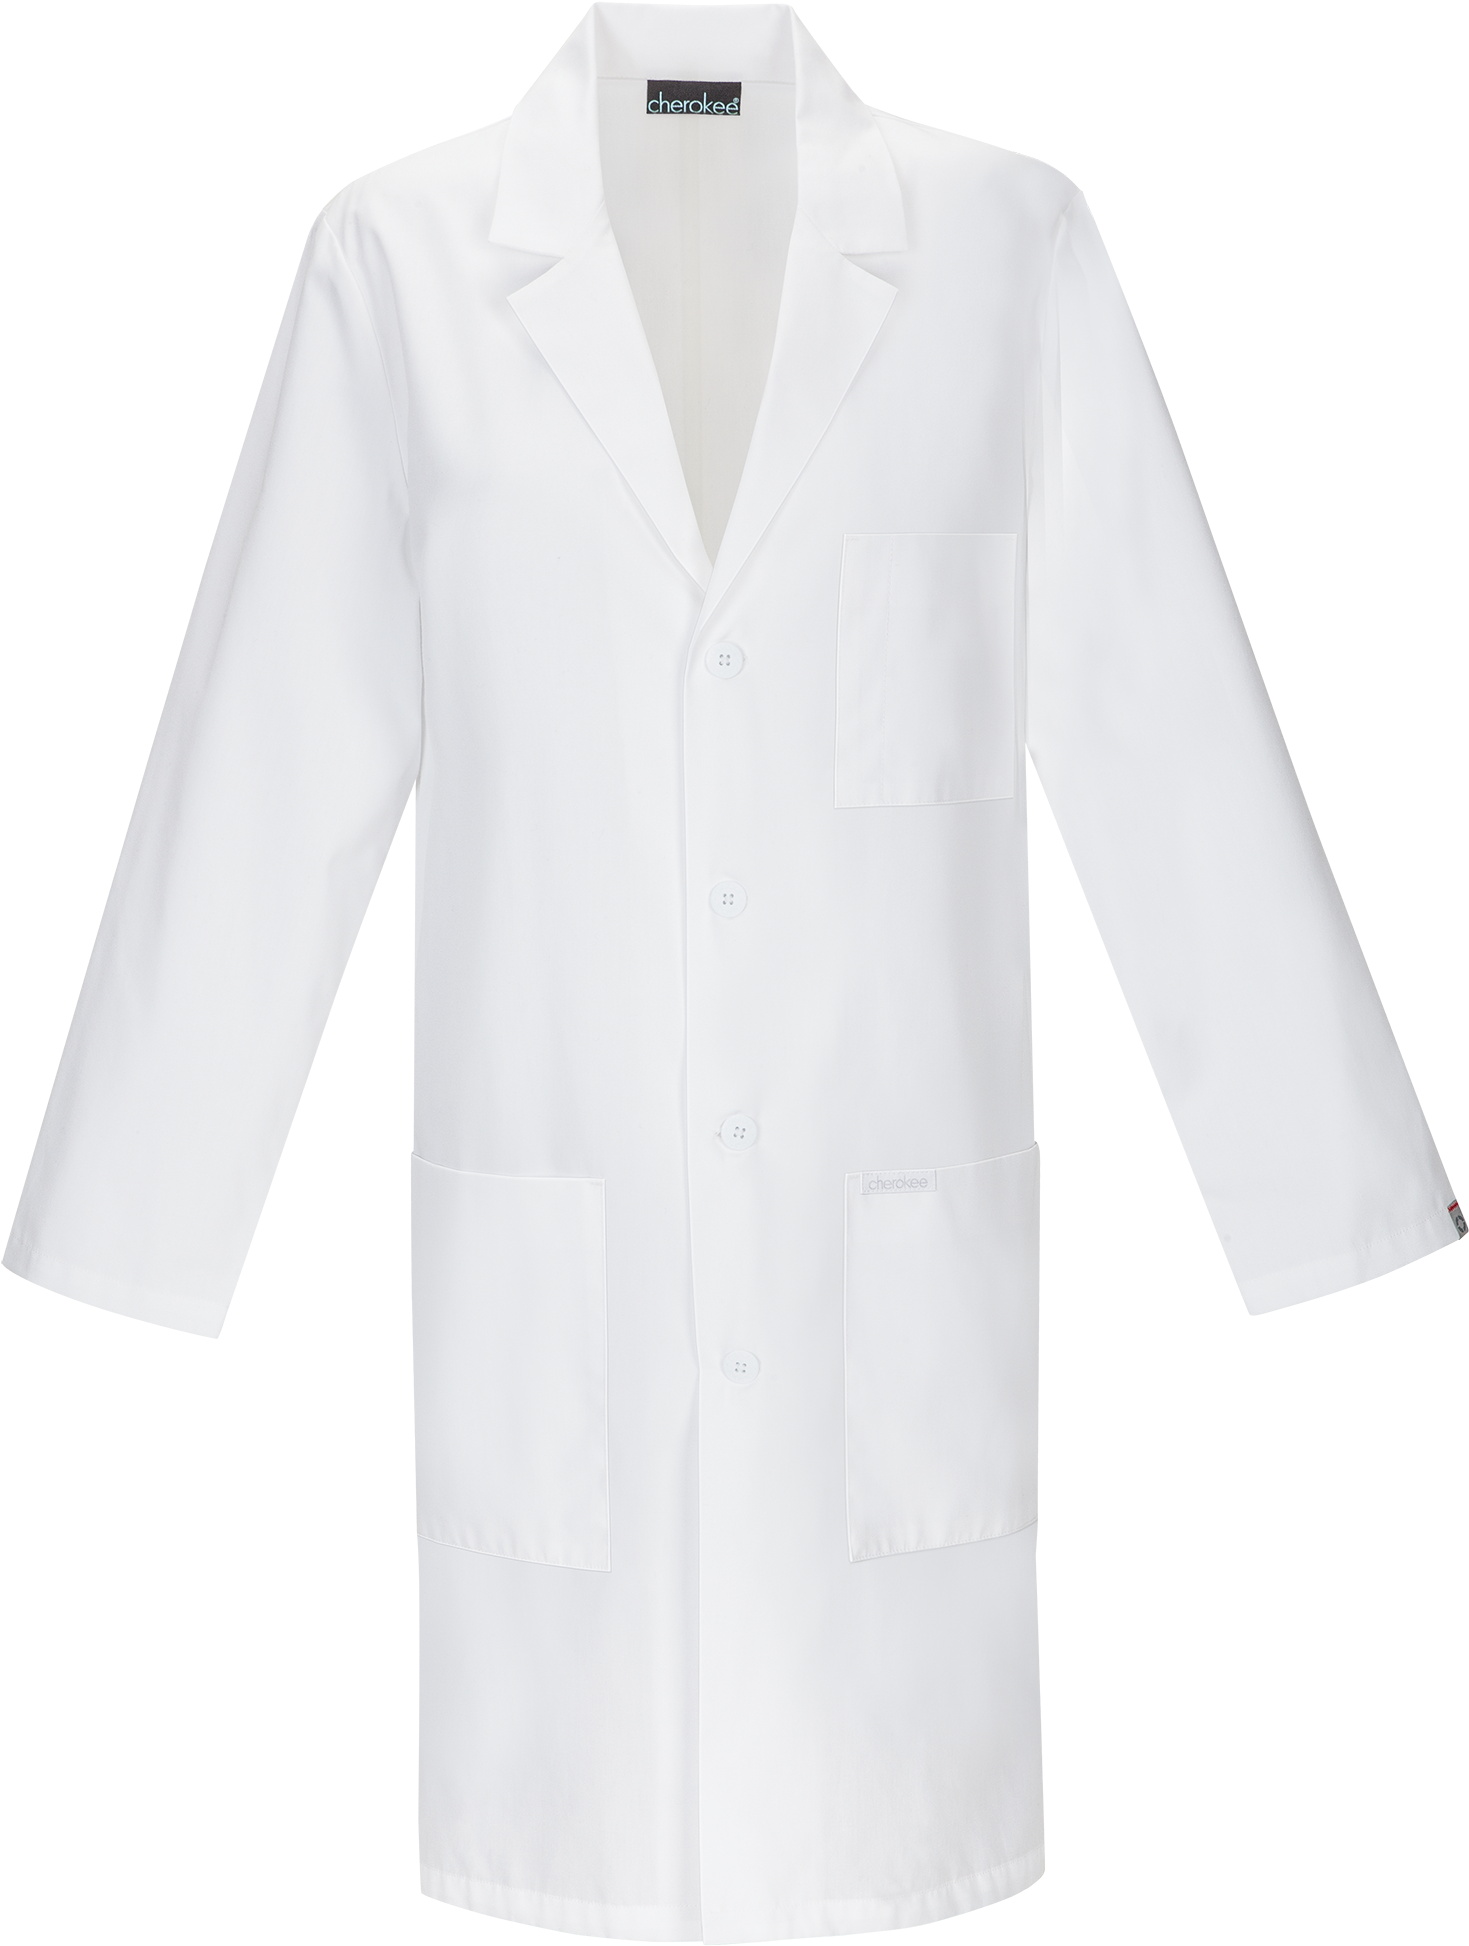 A White Lab Coat With Pockets